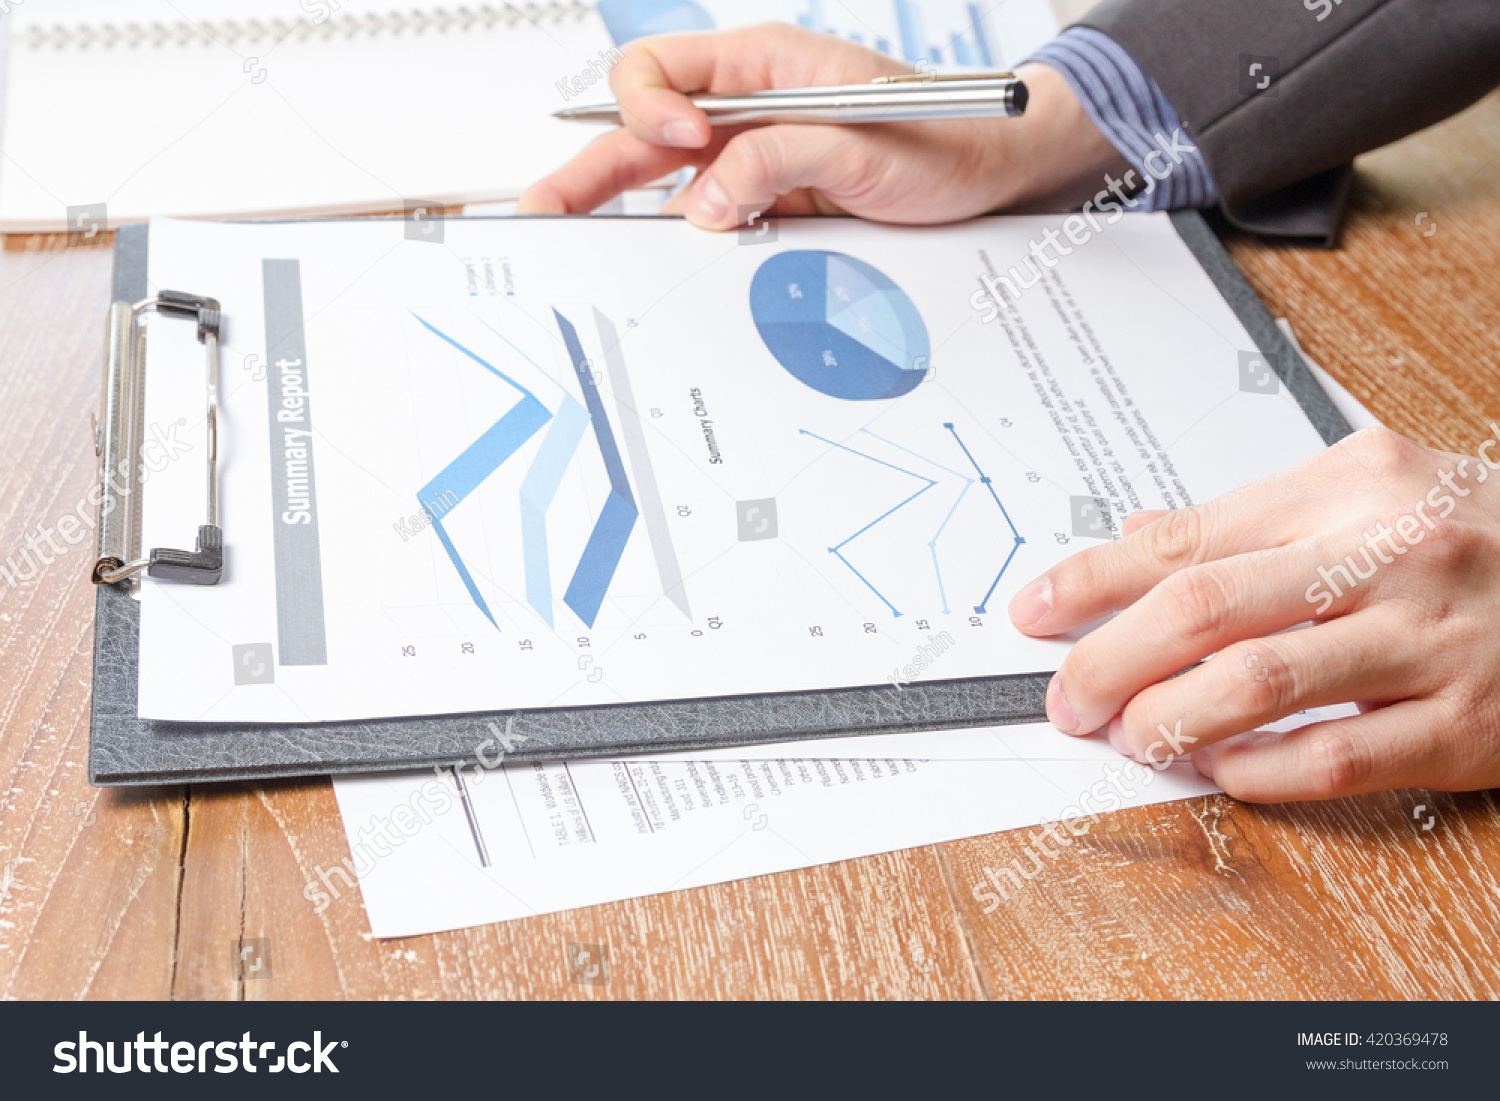 business man analyzing graph and chart document report, business performance concept #420369478